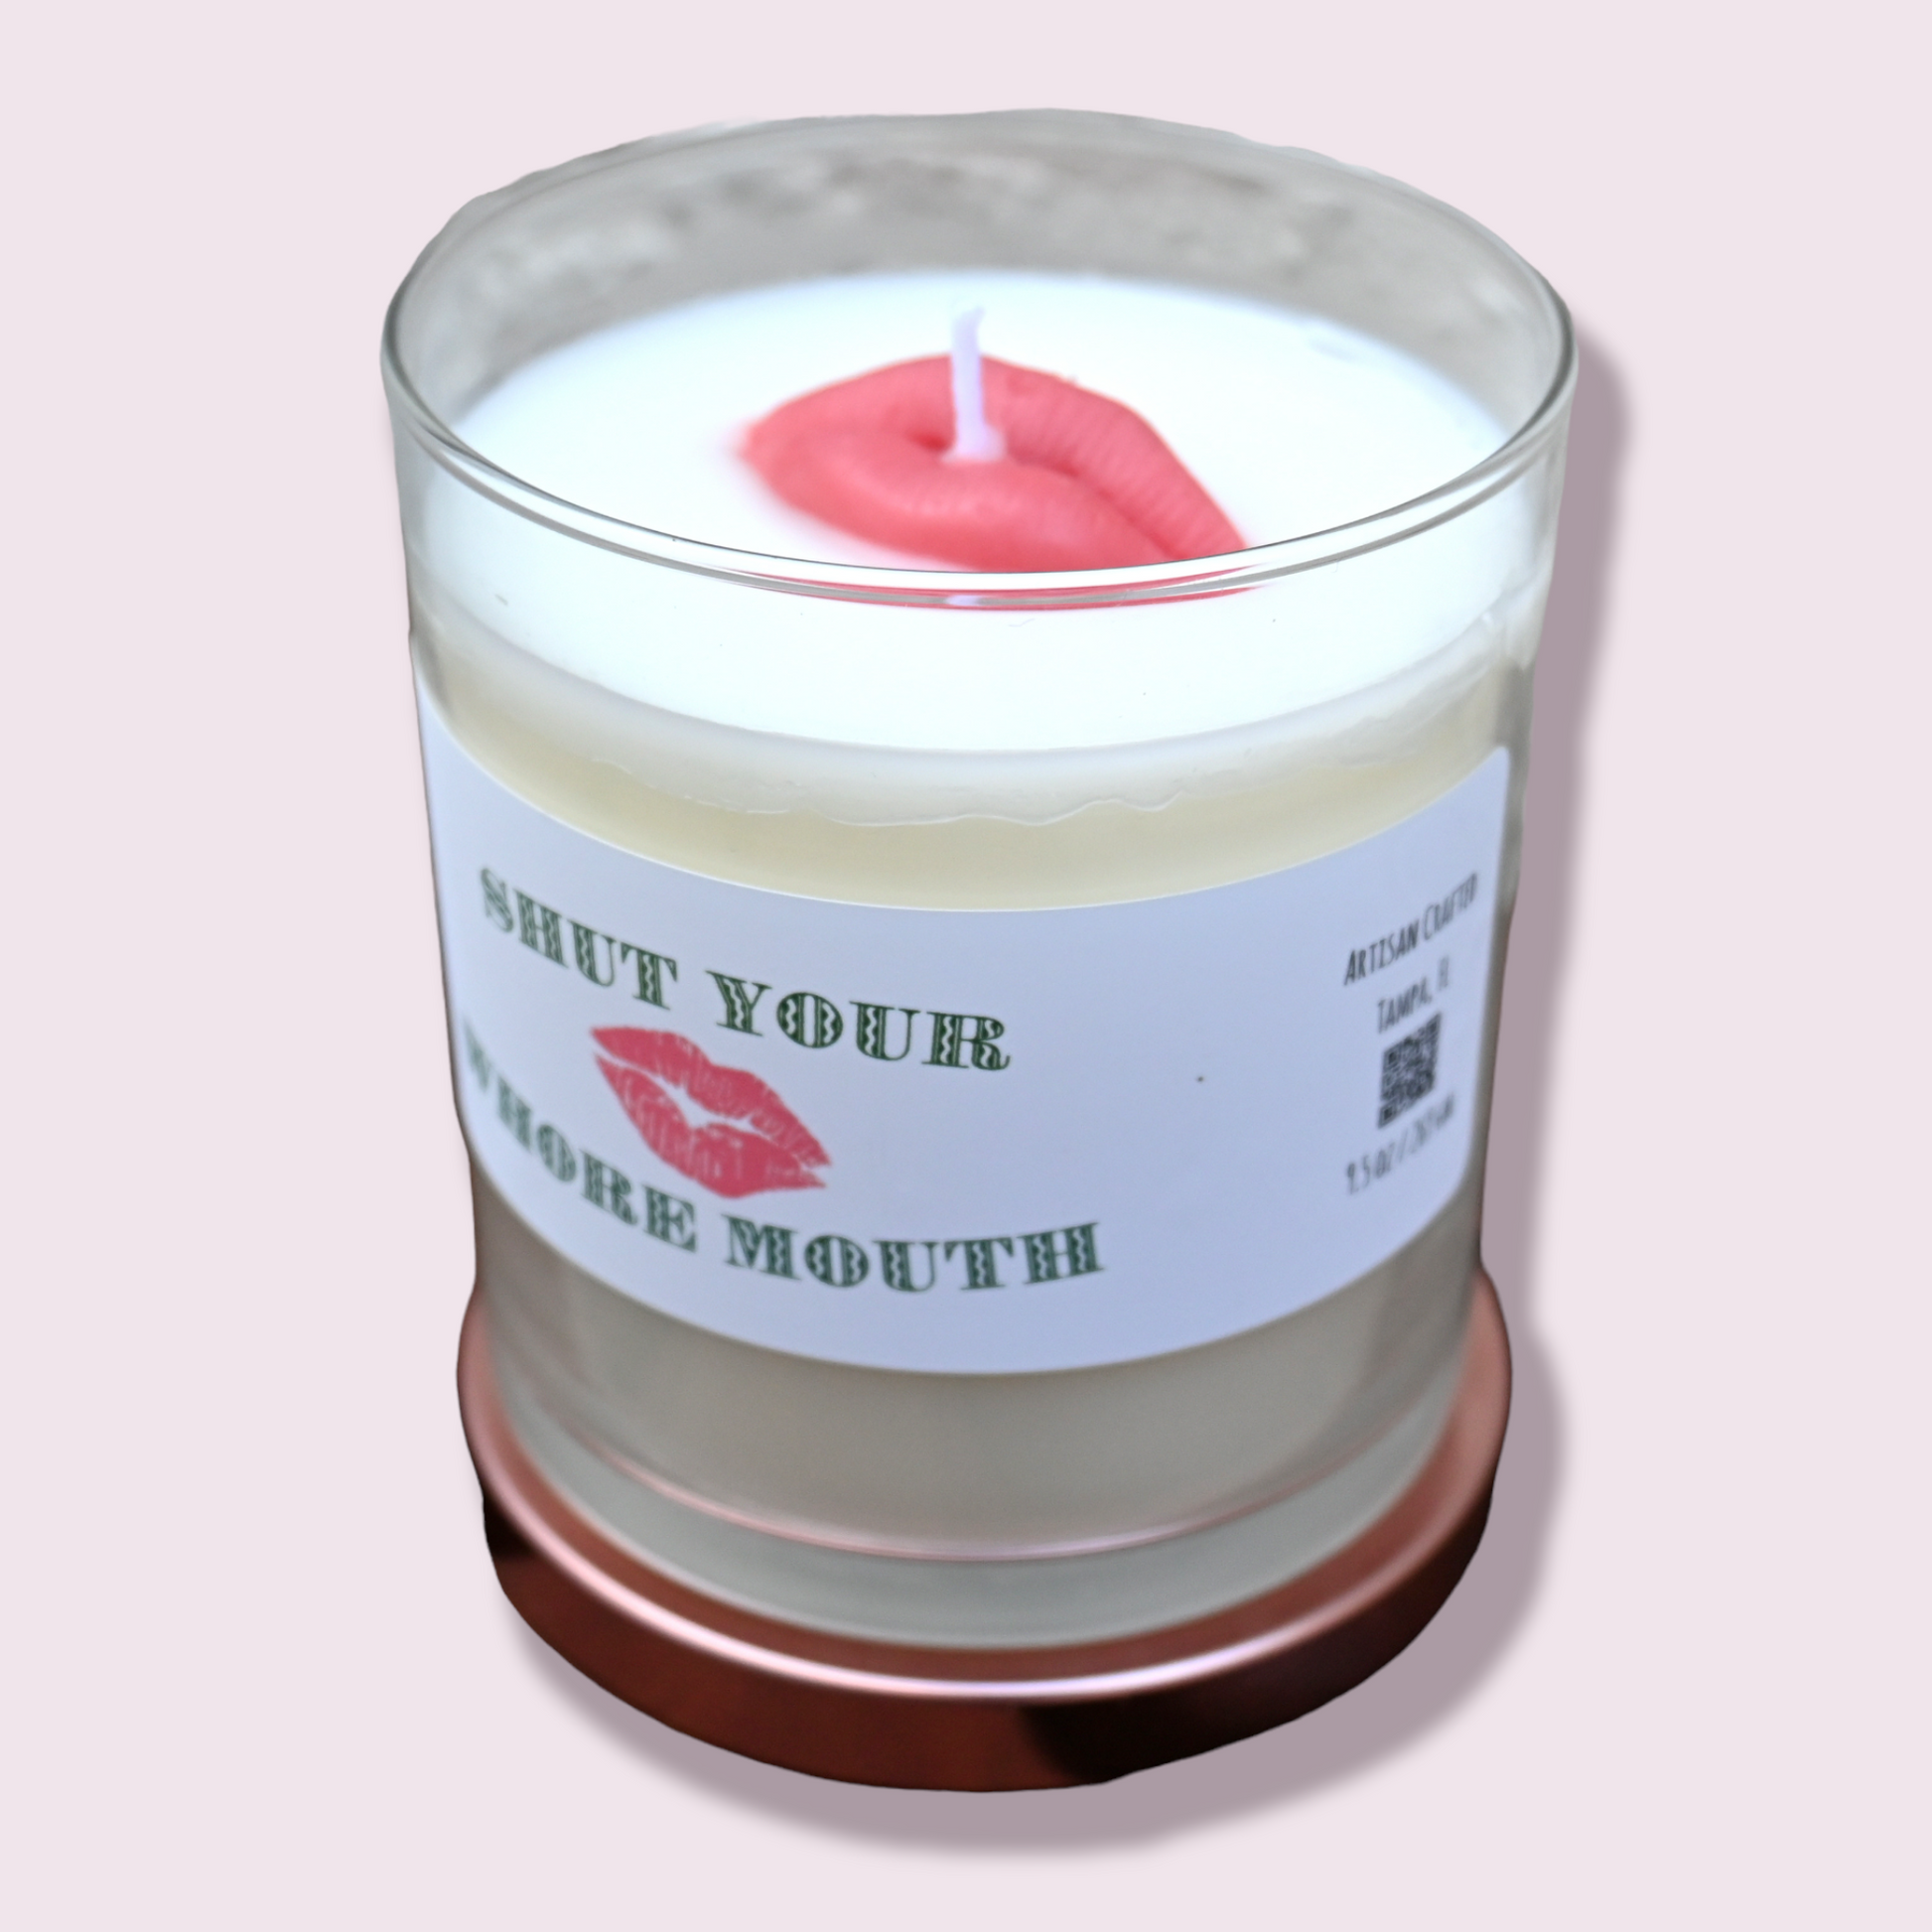 Shut Your Whore Mouth Mint & Basil Candle